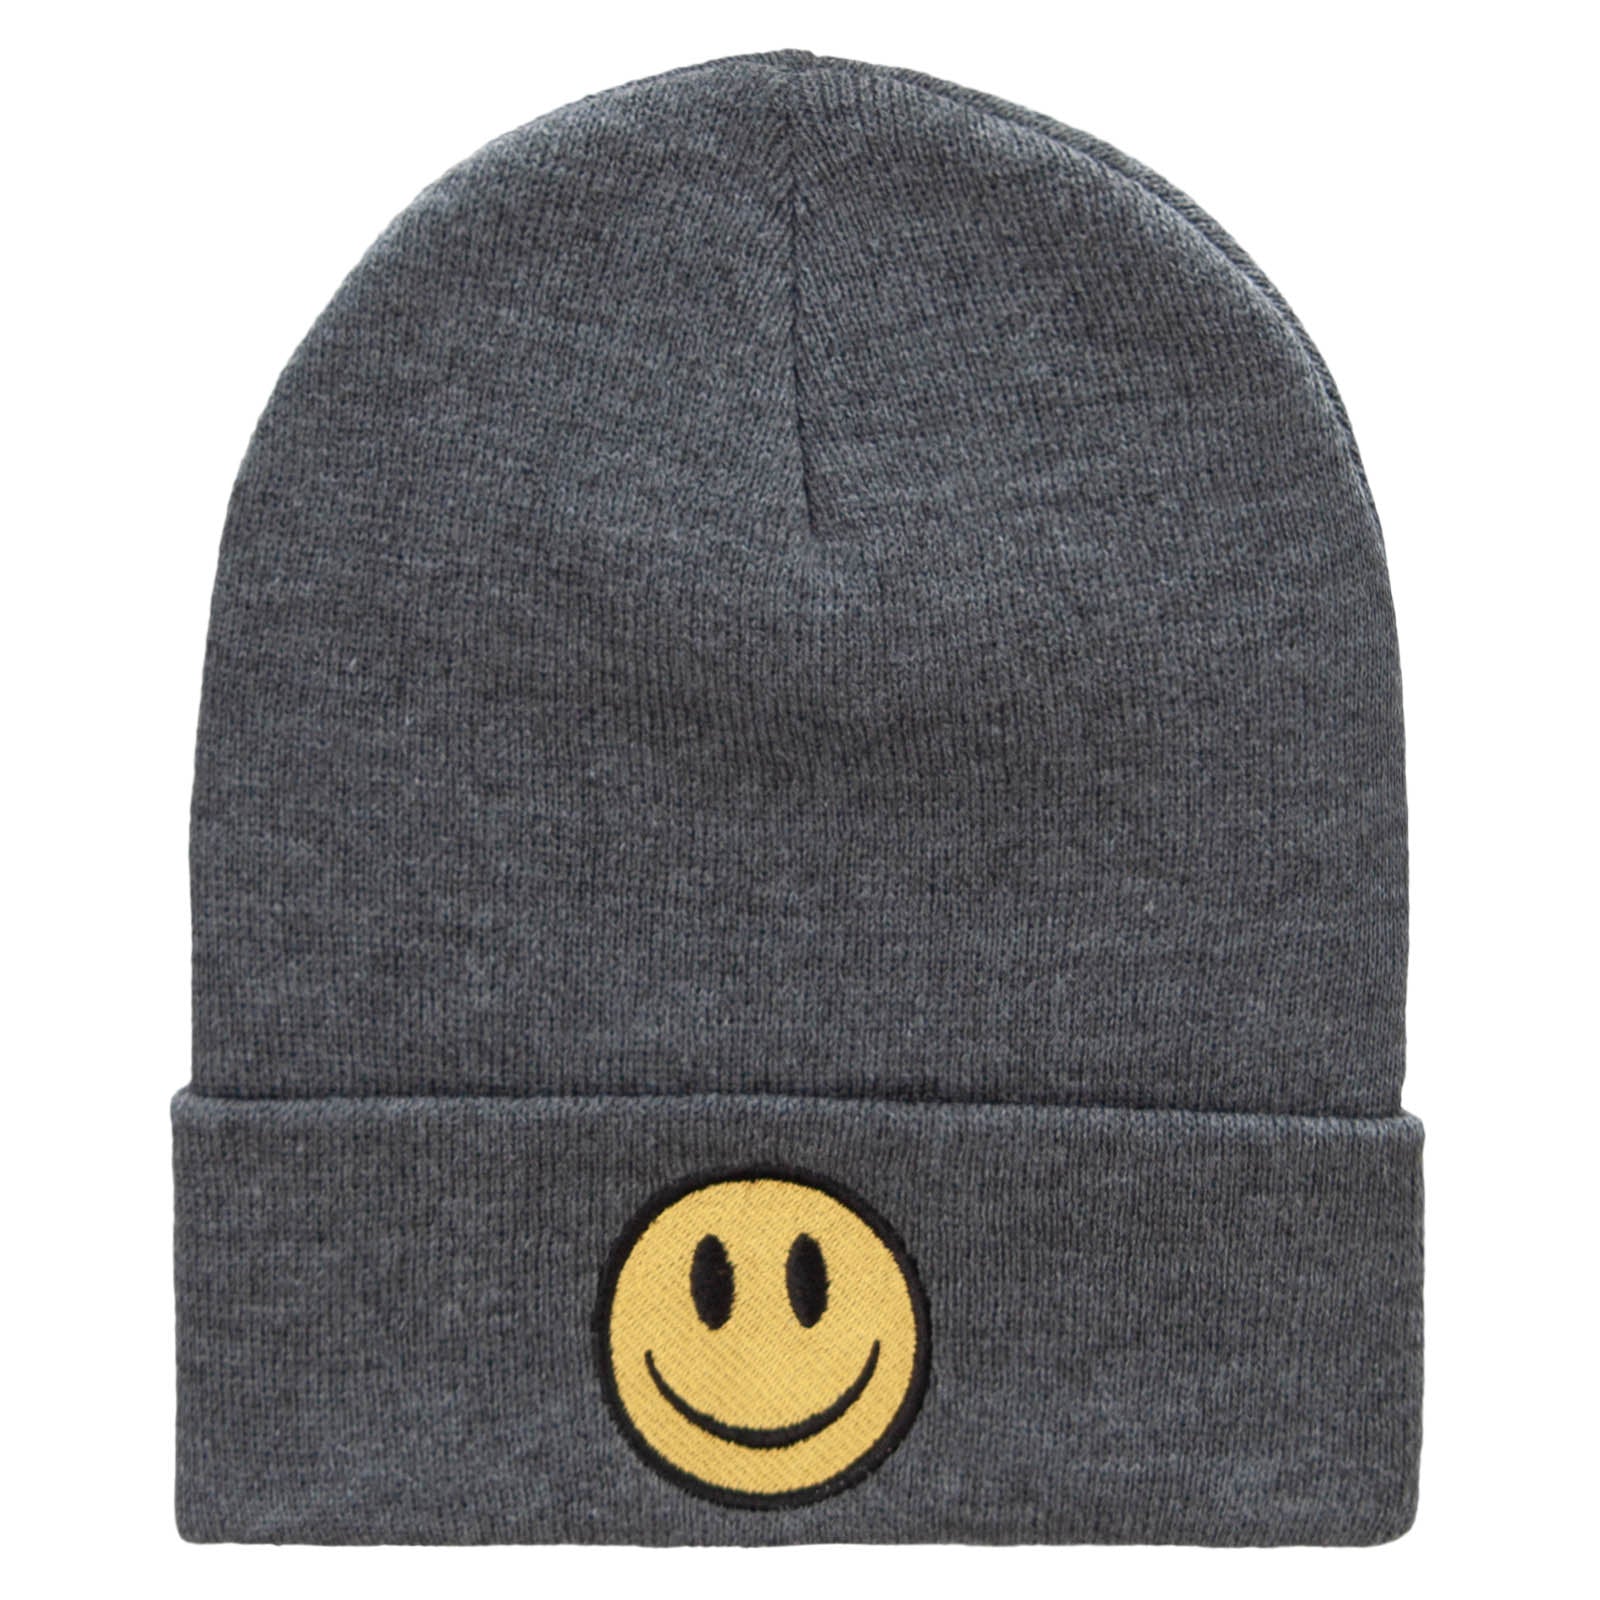 Smile Face Embroidered Long Beanie - Heather Charcoal OSFM